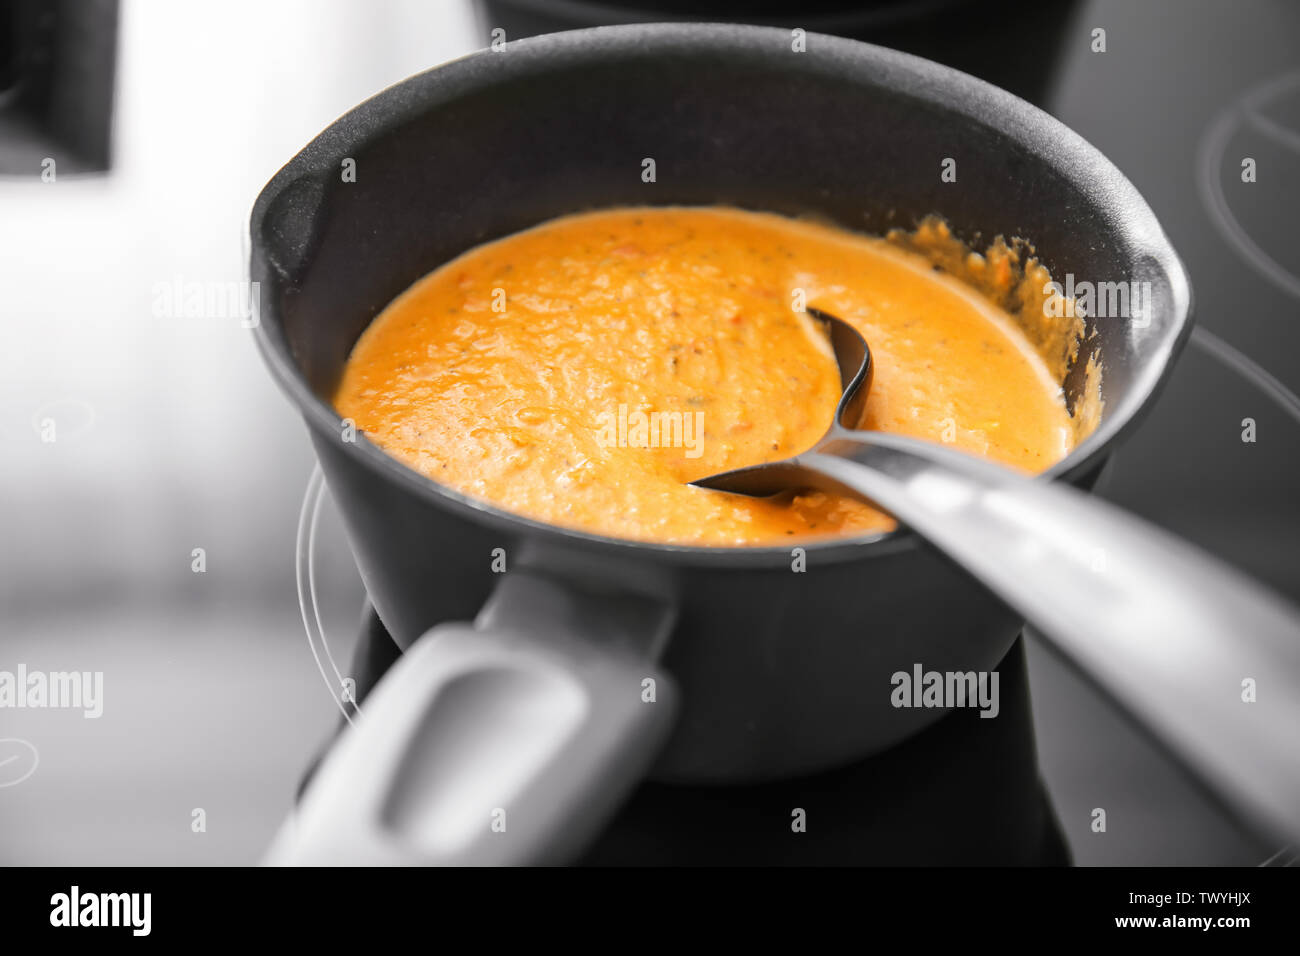 cooking-of-delicious-cream-soup-on-electric-stove-stock-photo-alamy